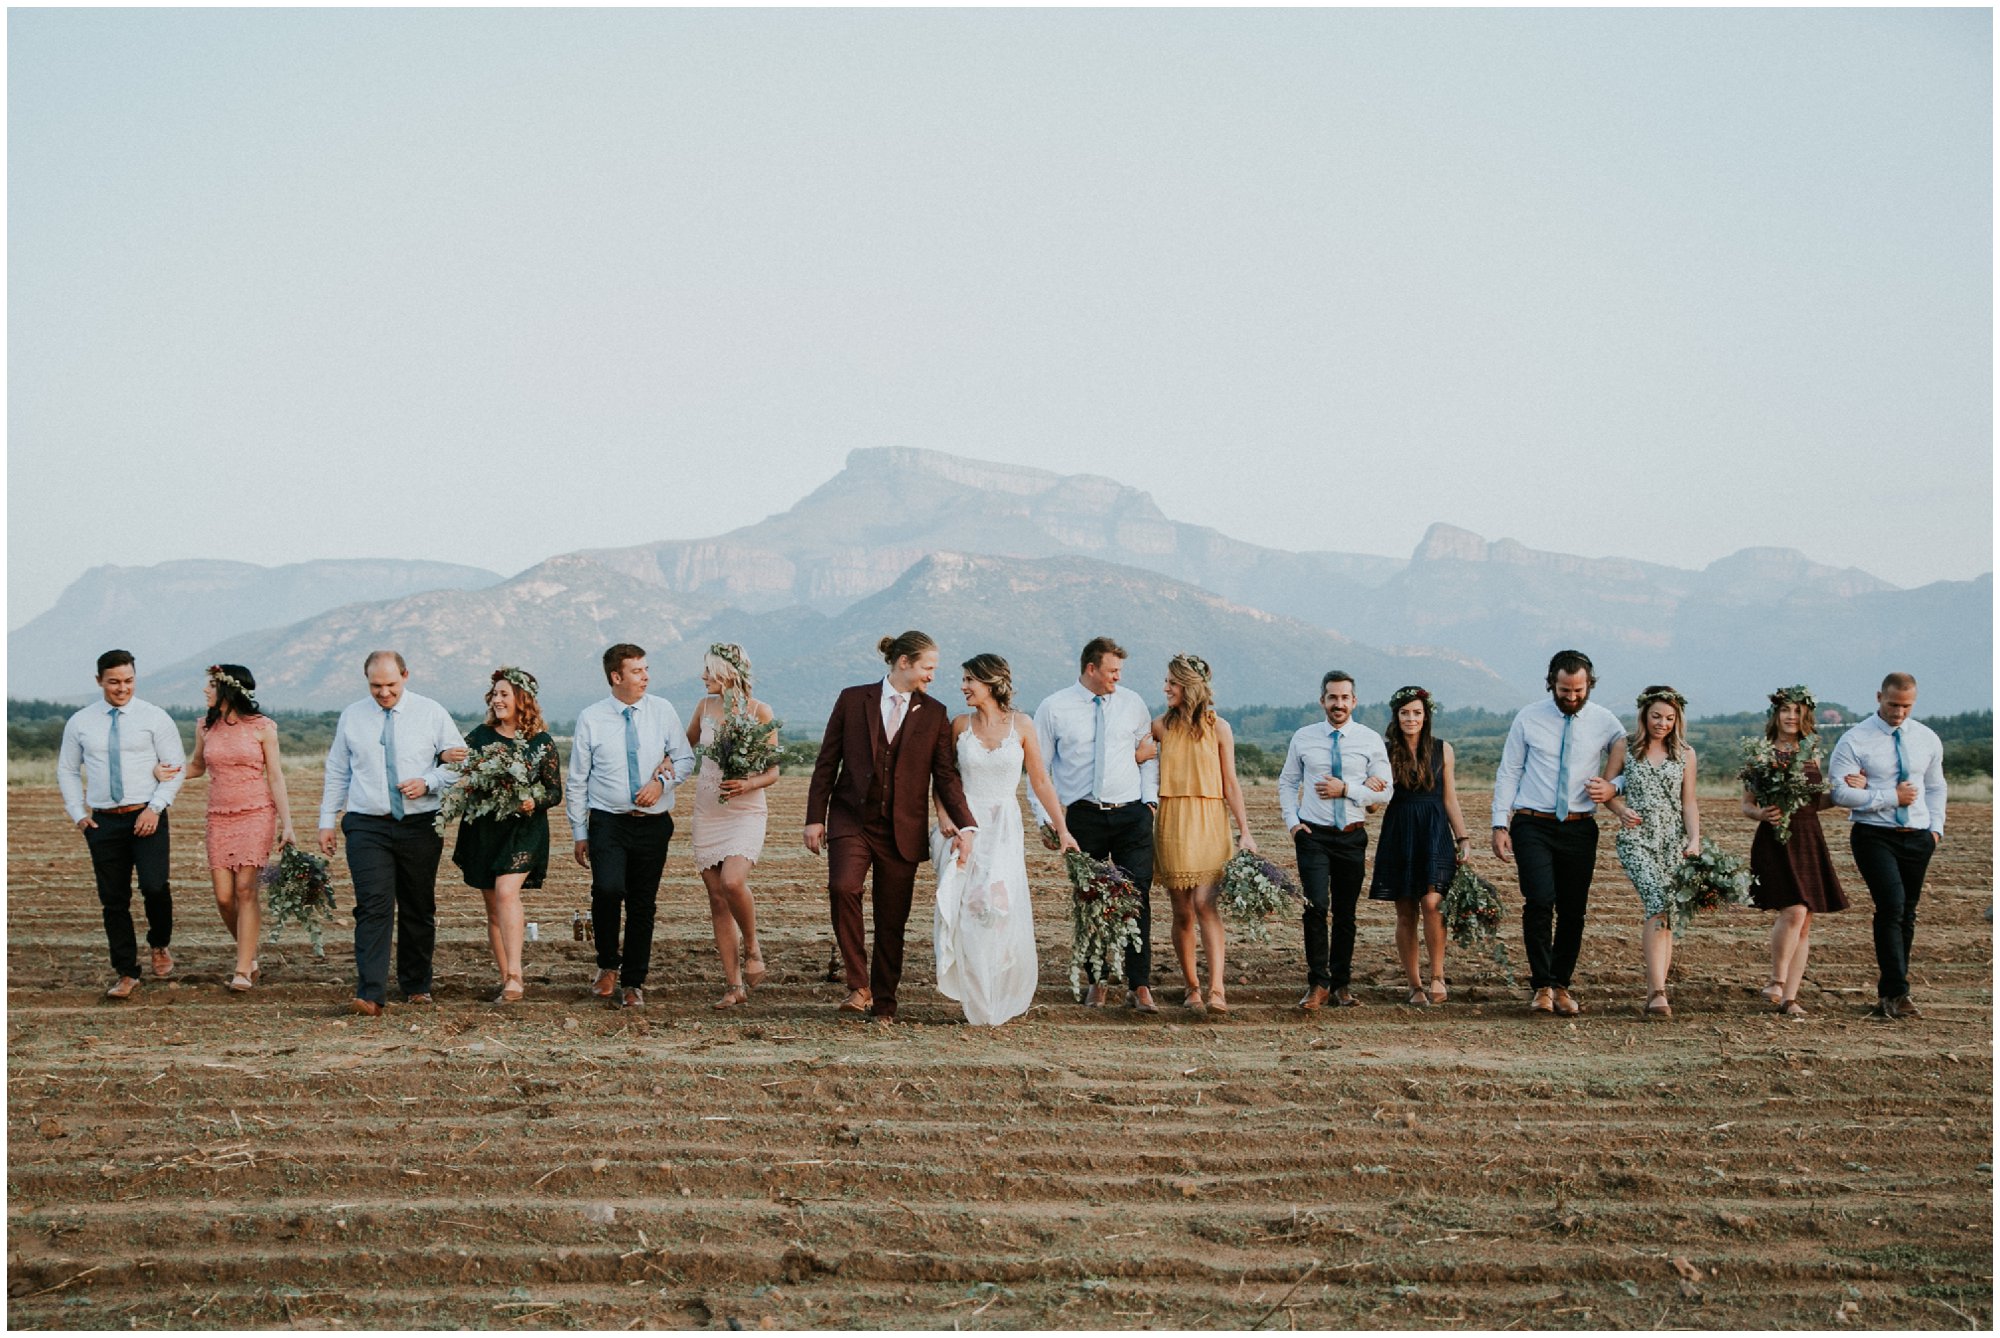 Bridesmaid Groomsmen Best Man Bride Groom Shoot at an Outdoor Bohemian Destination Wedding at Francine’s Venue in Hoedspruit Limpopo by Junebug World's Best Photographer Maryke Albertyn Award Winning International Alternative Moody Photography based in Cape Town South Africa